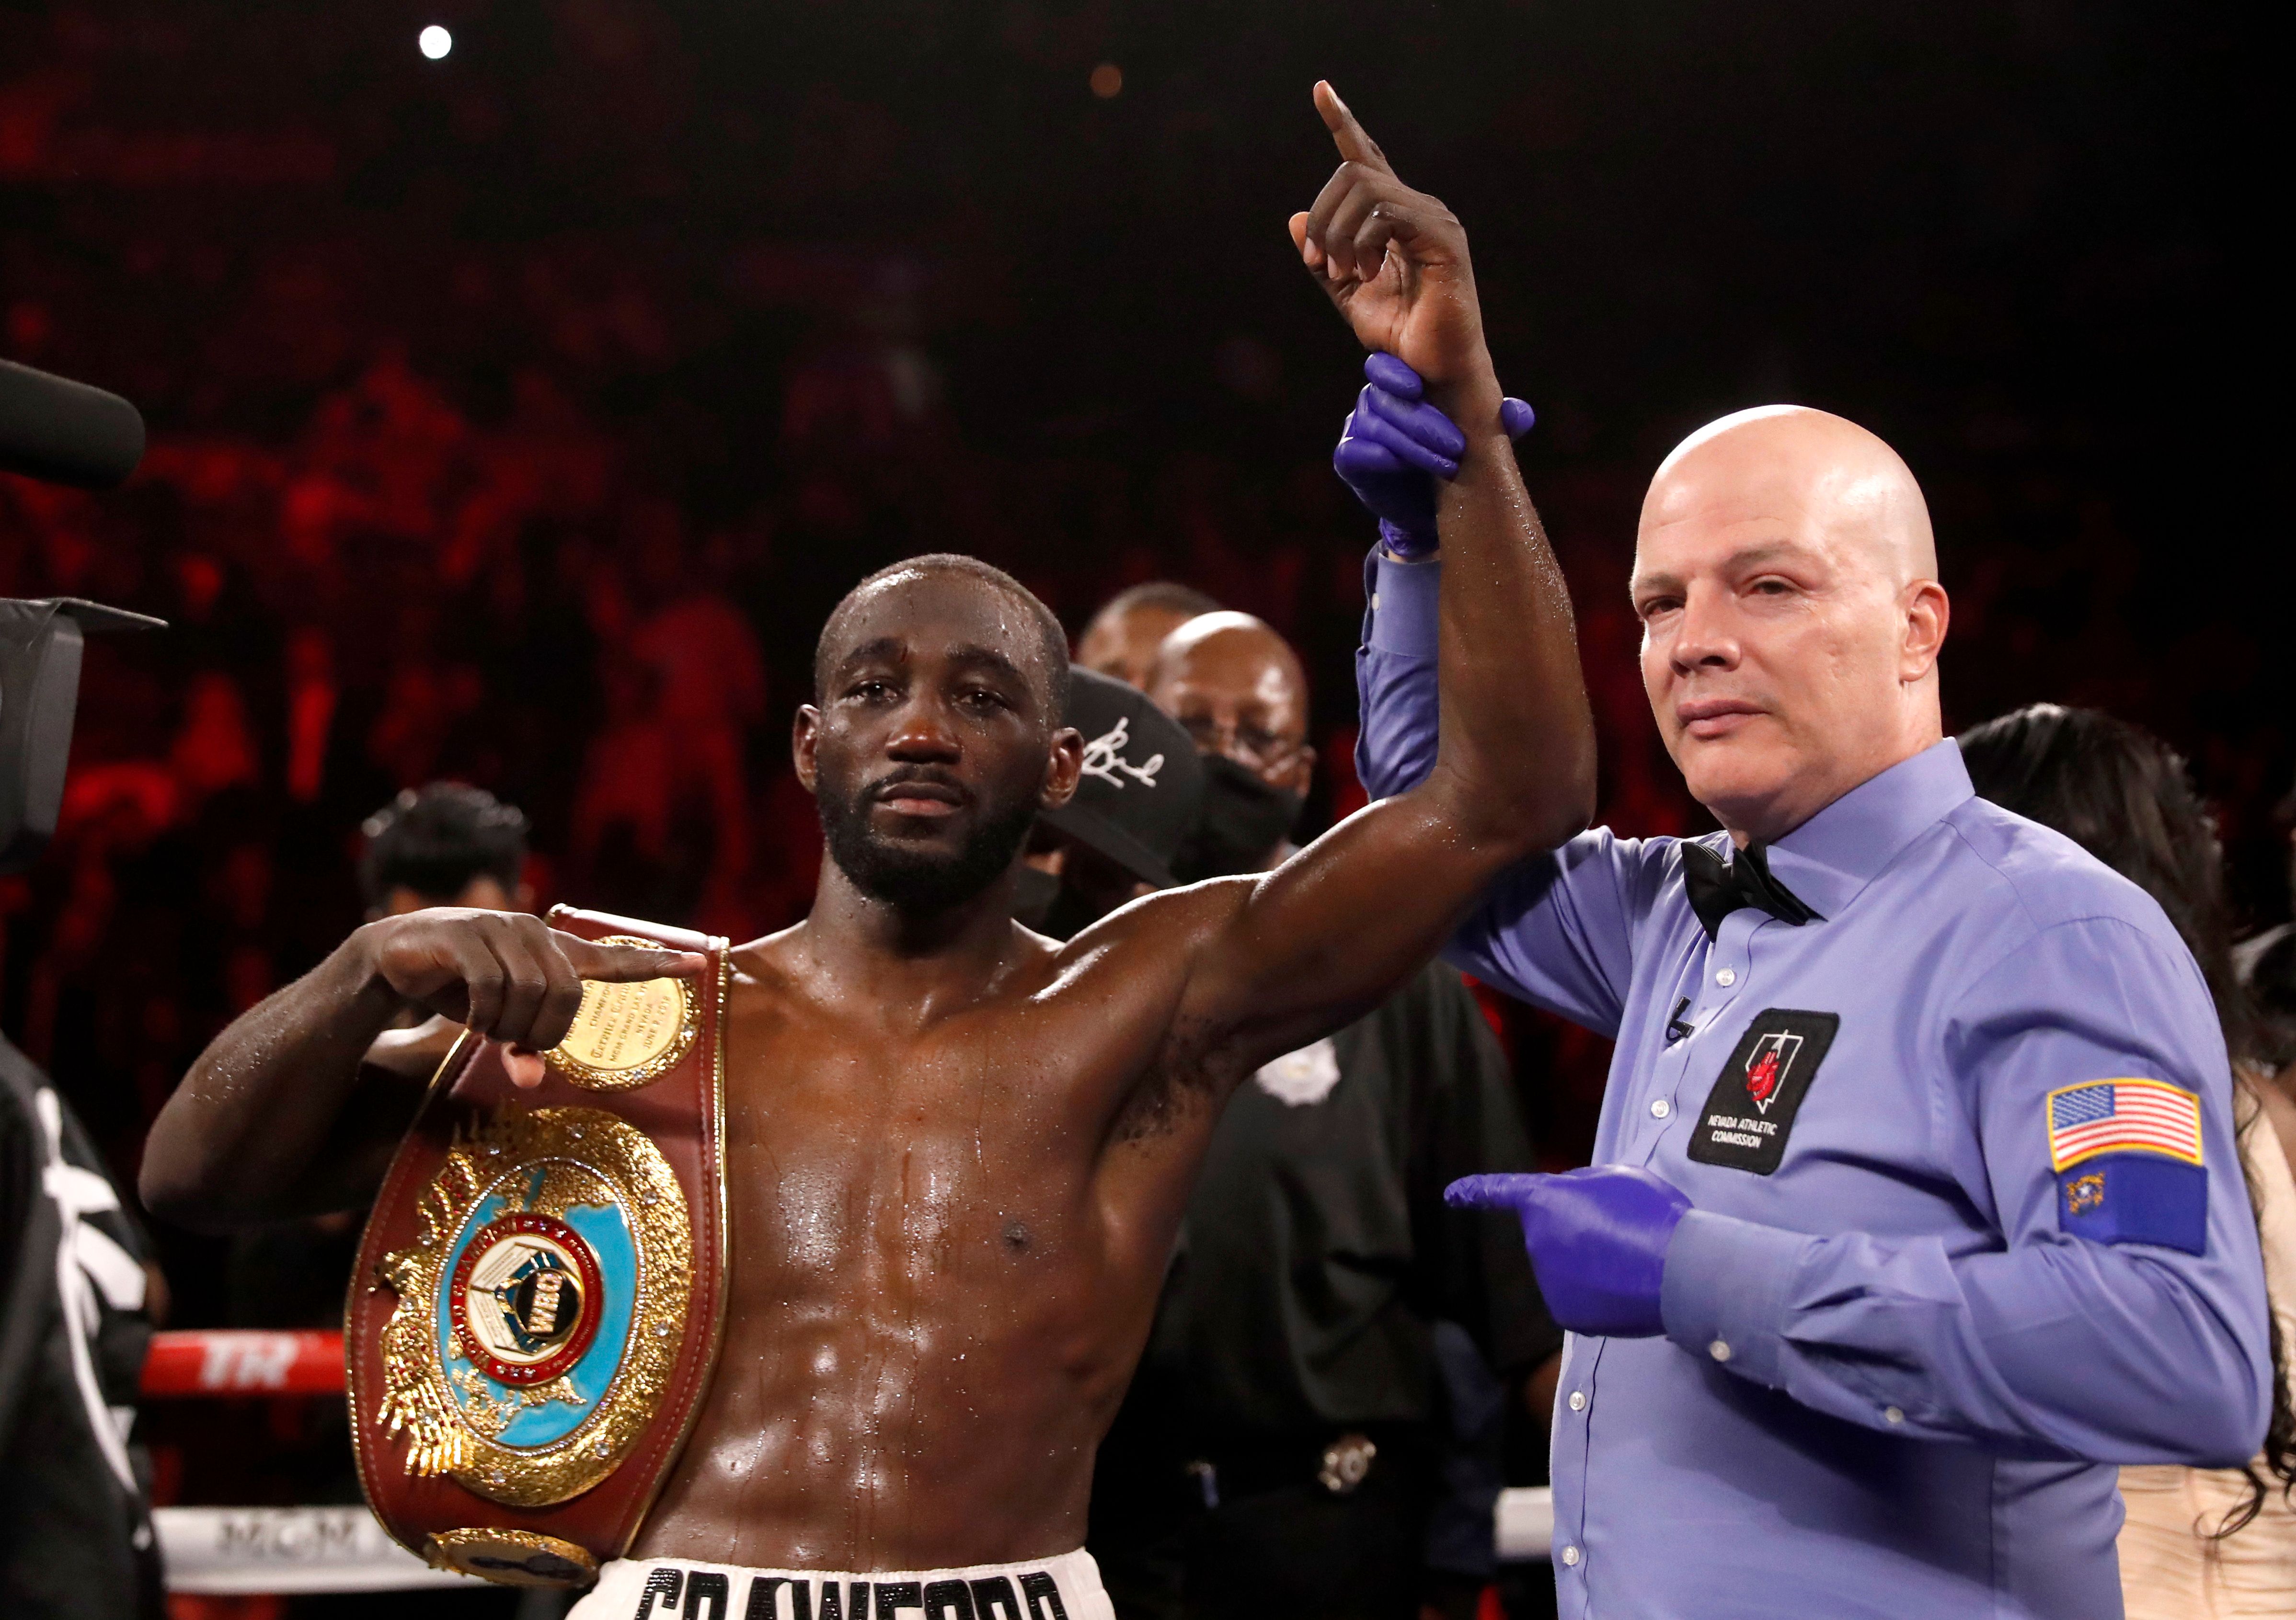 WBO welterweight champion Terence Crawford returns to action on December 10